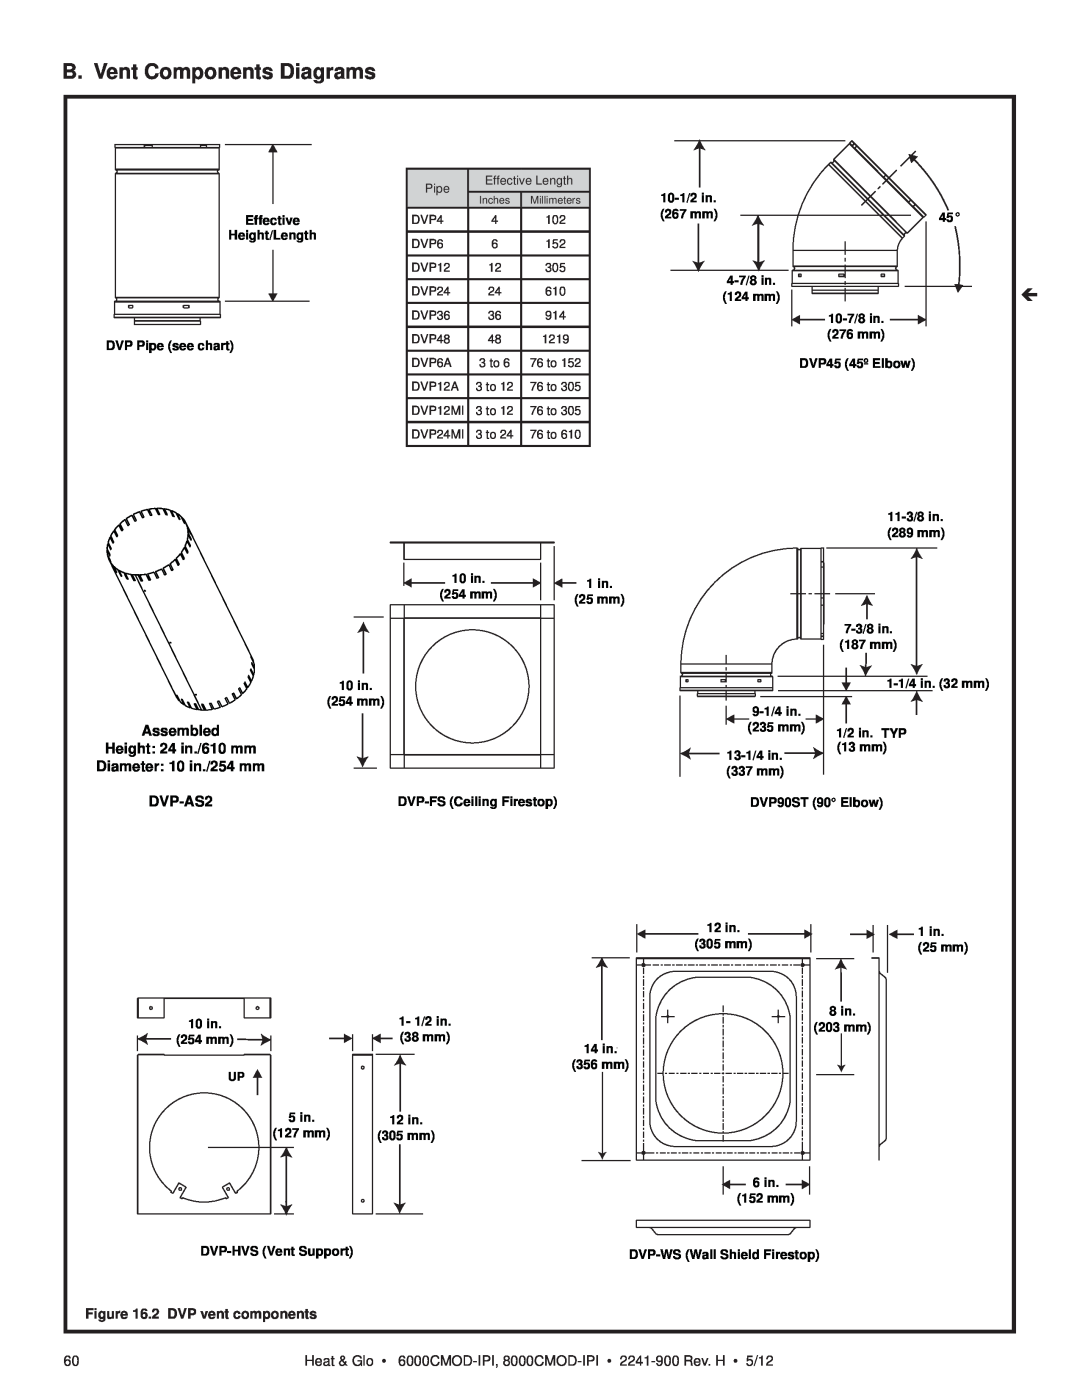 Heat & Glo LifeStyle 8000CMOD-IPI B. Vent Components Diagrams, Height: 24 in./610 mm, DVP-AS2, Heat & Glo •, Assembled 